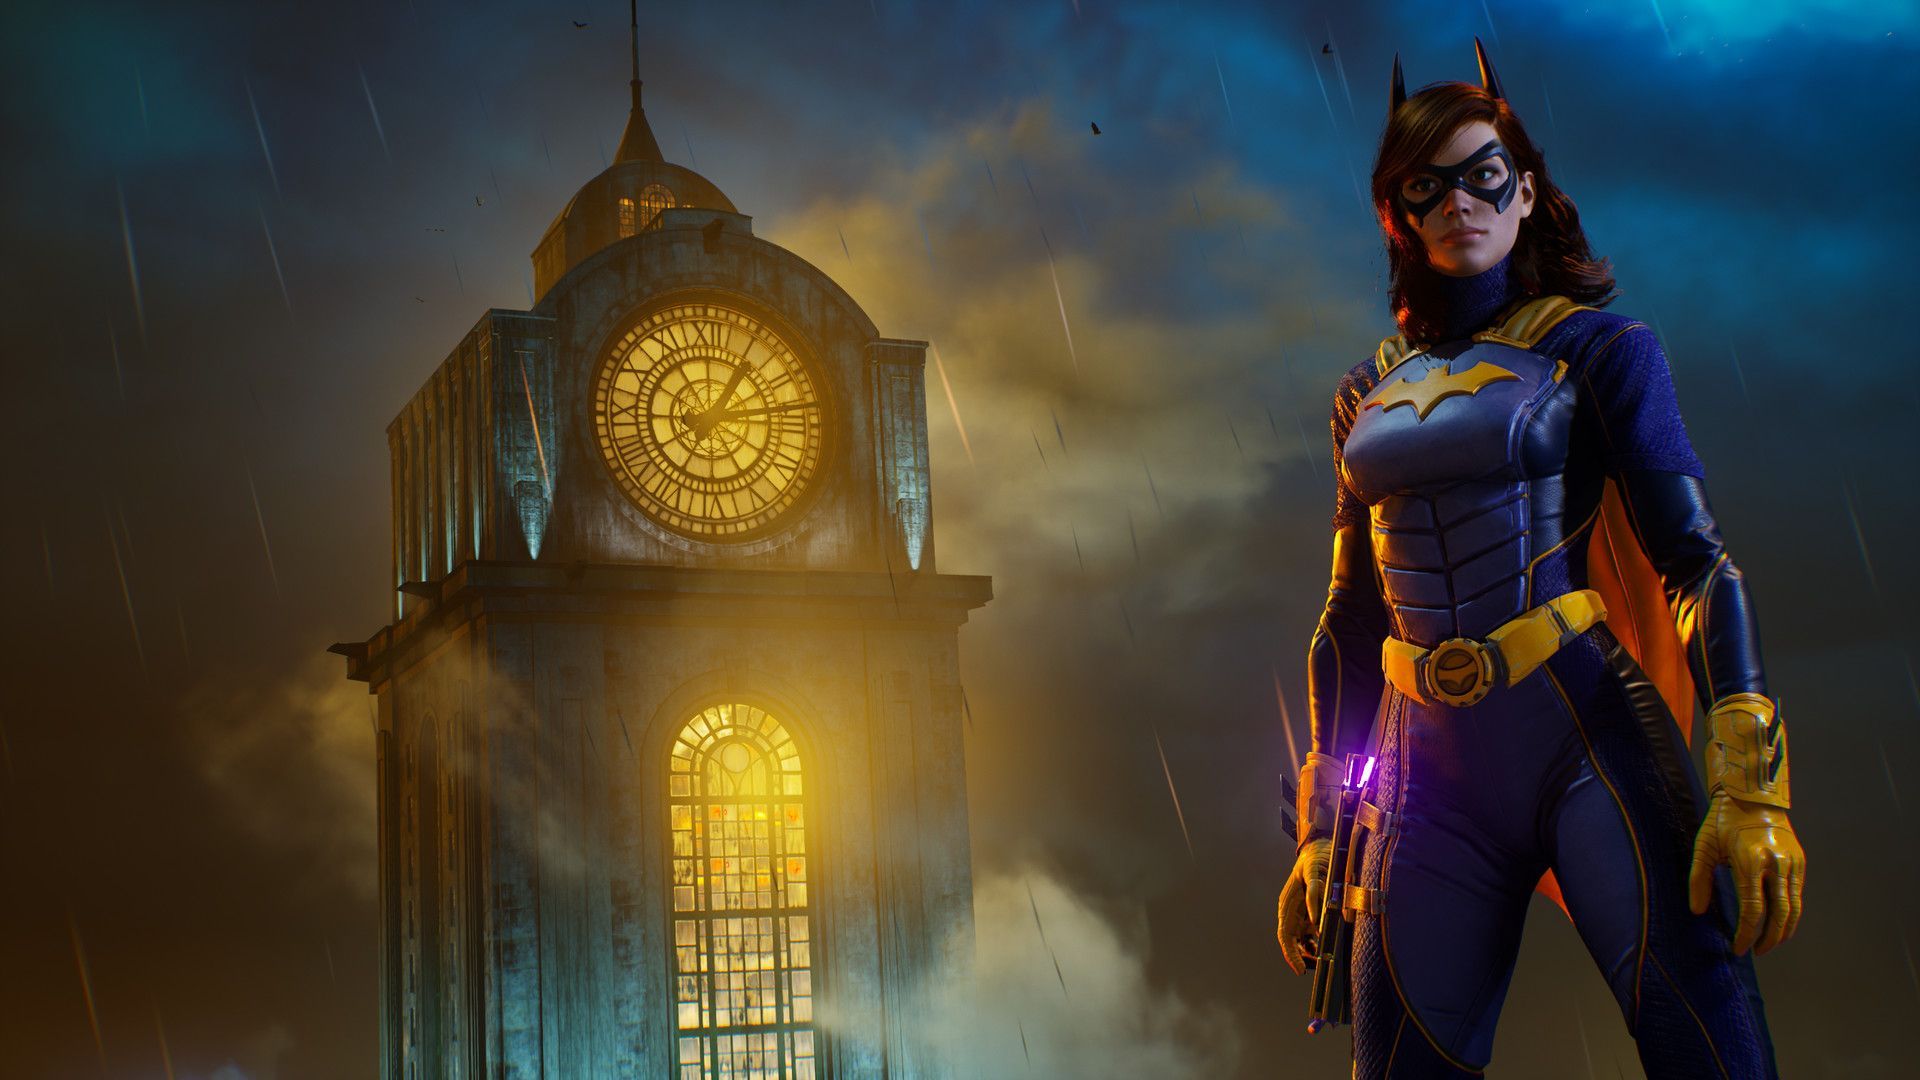 In this article, we are going to be covering how to switch characters Gotham Knights, so you can enjoy the new game to the fullest with all 4 characters.